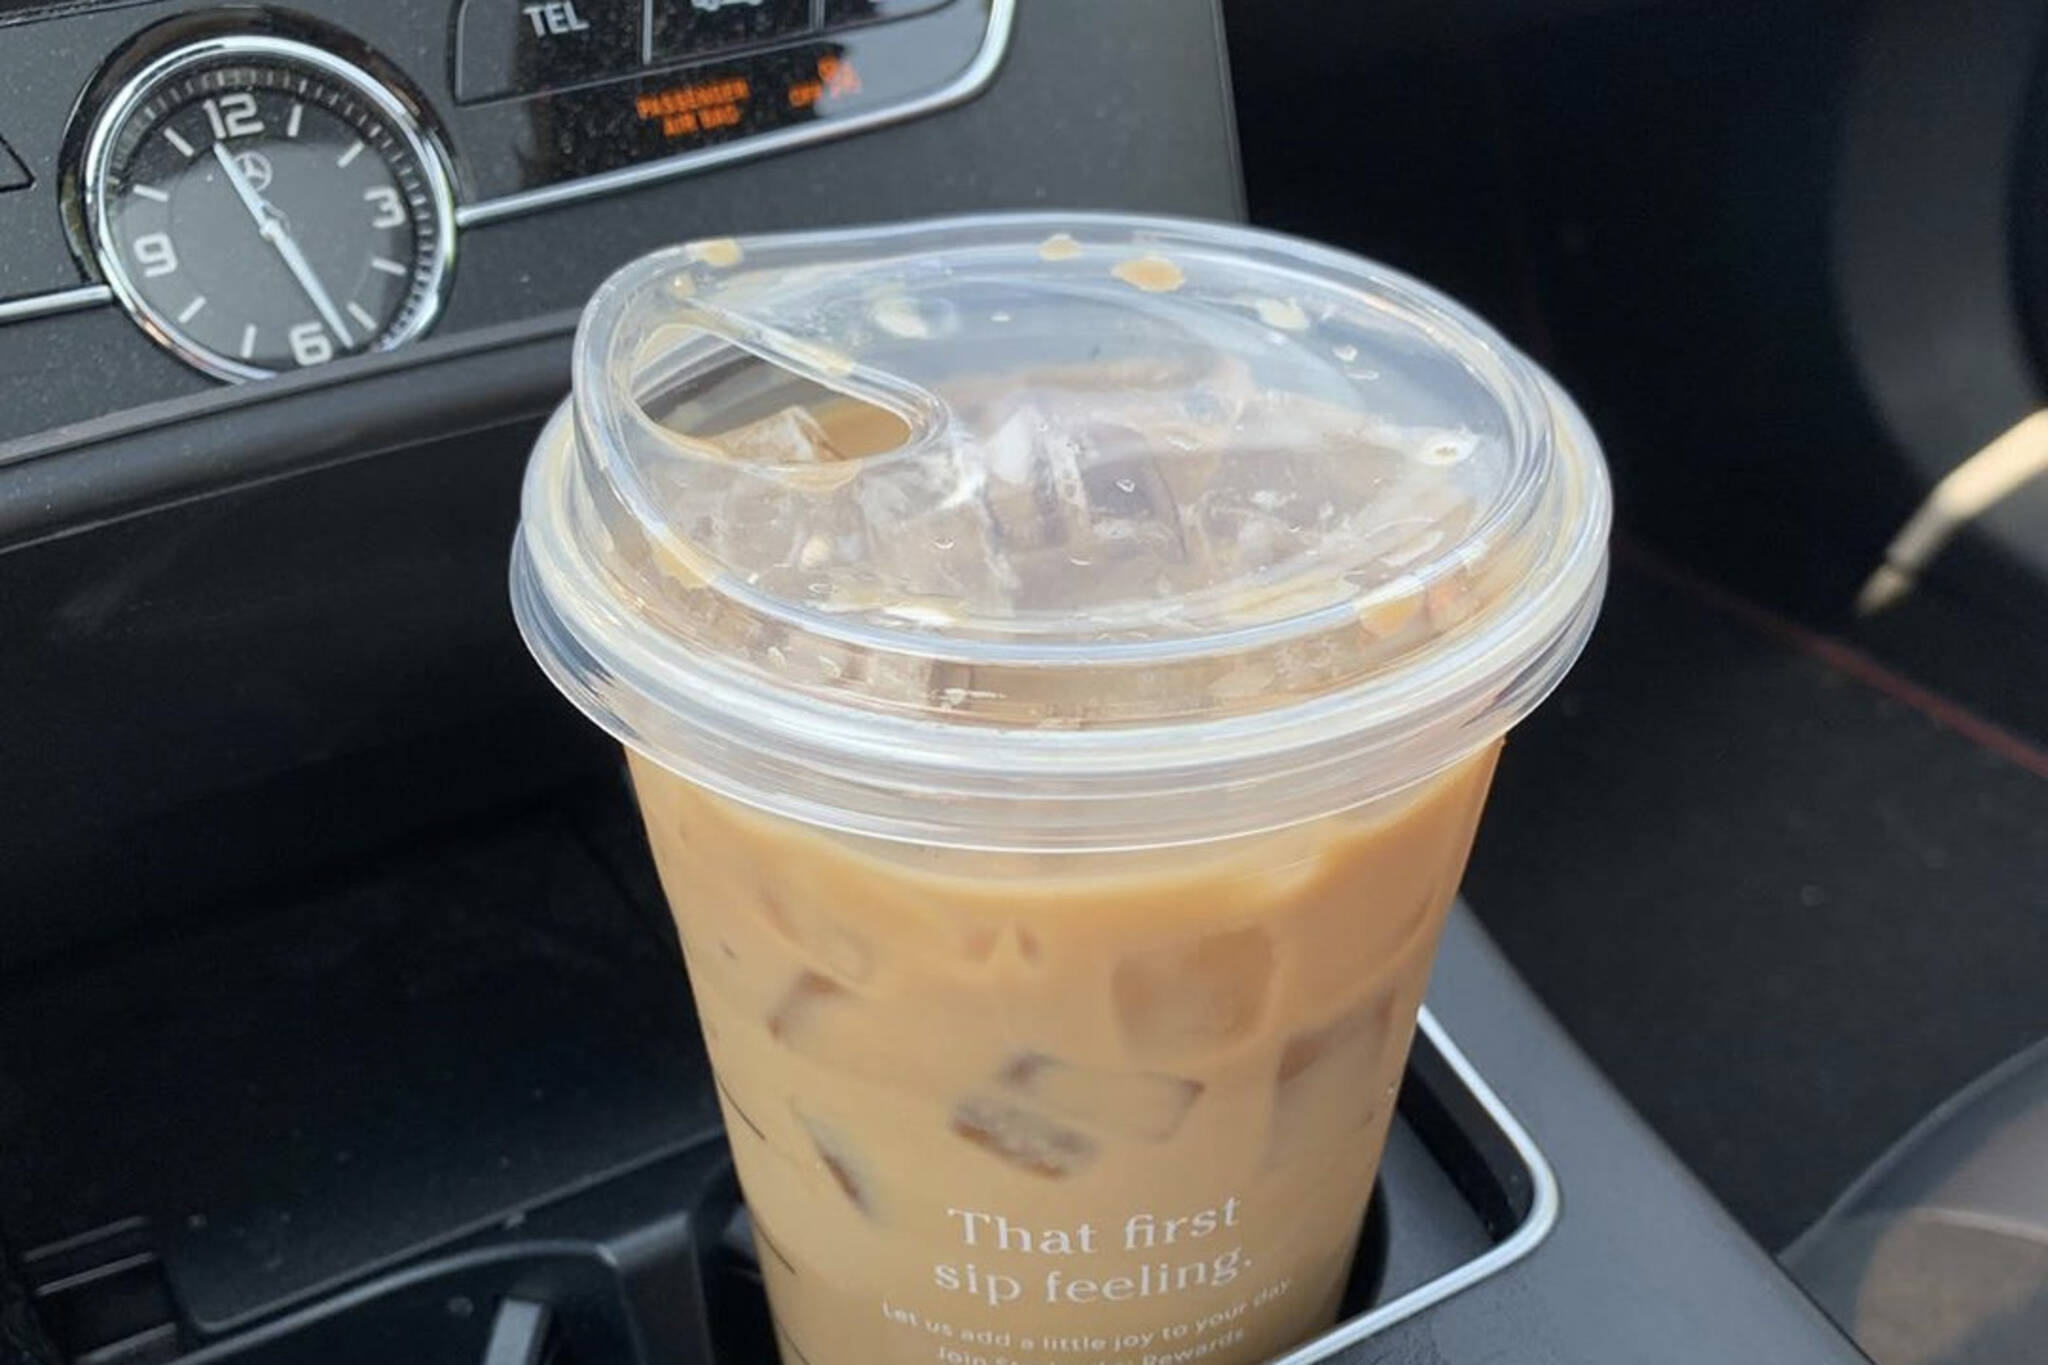 People aren't loving Starbucks' new sippy cup lids in Toronto